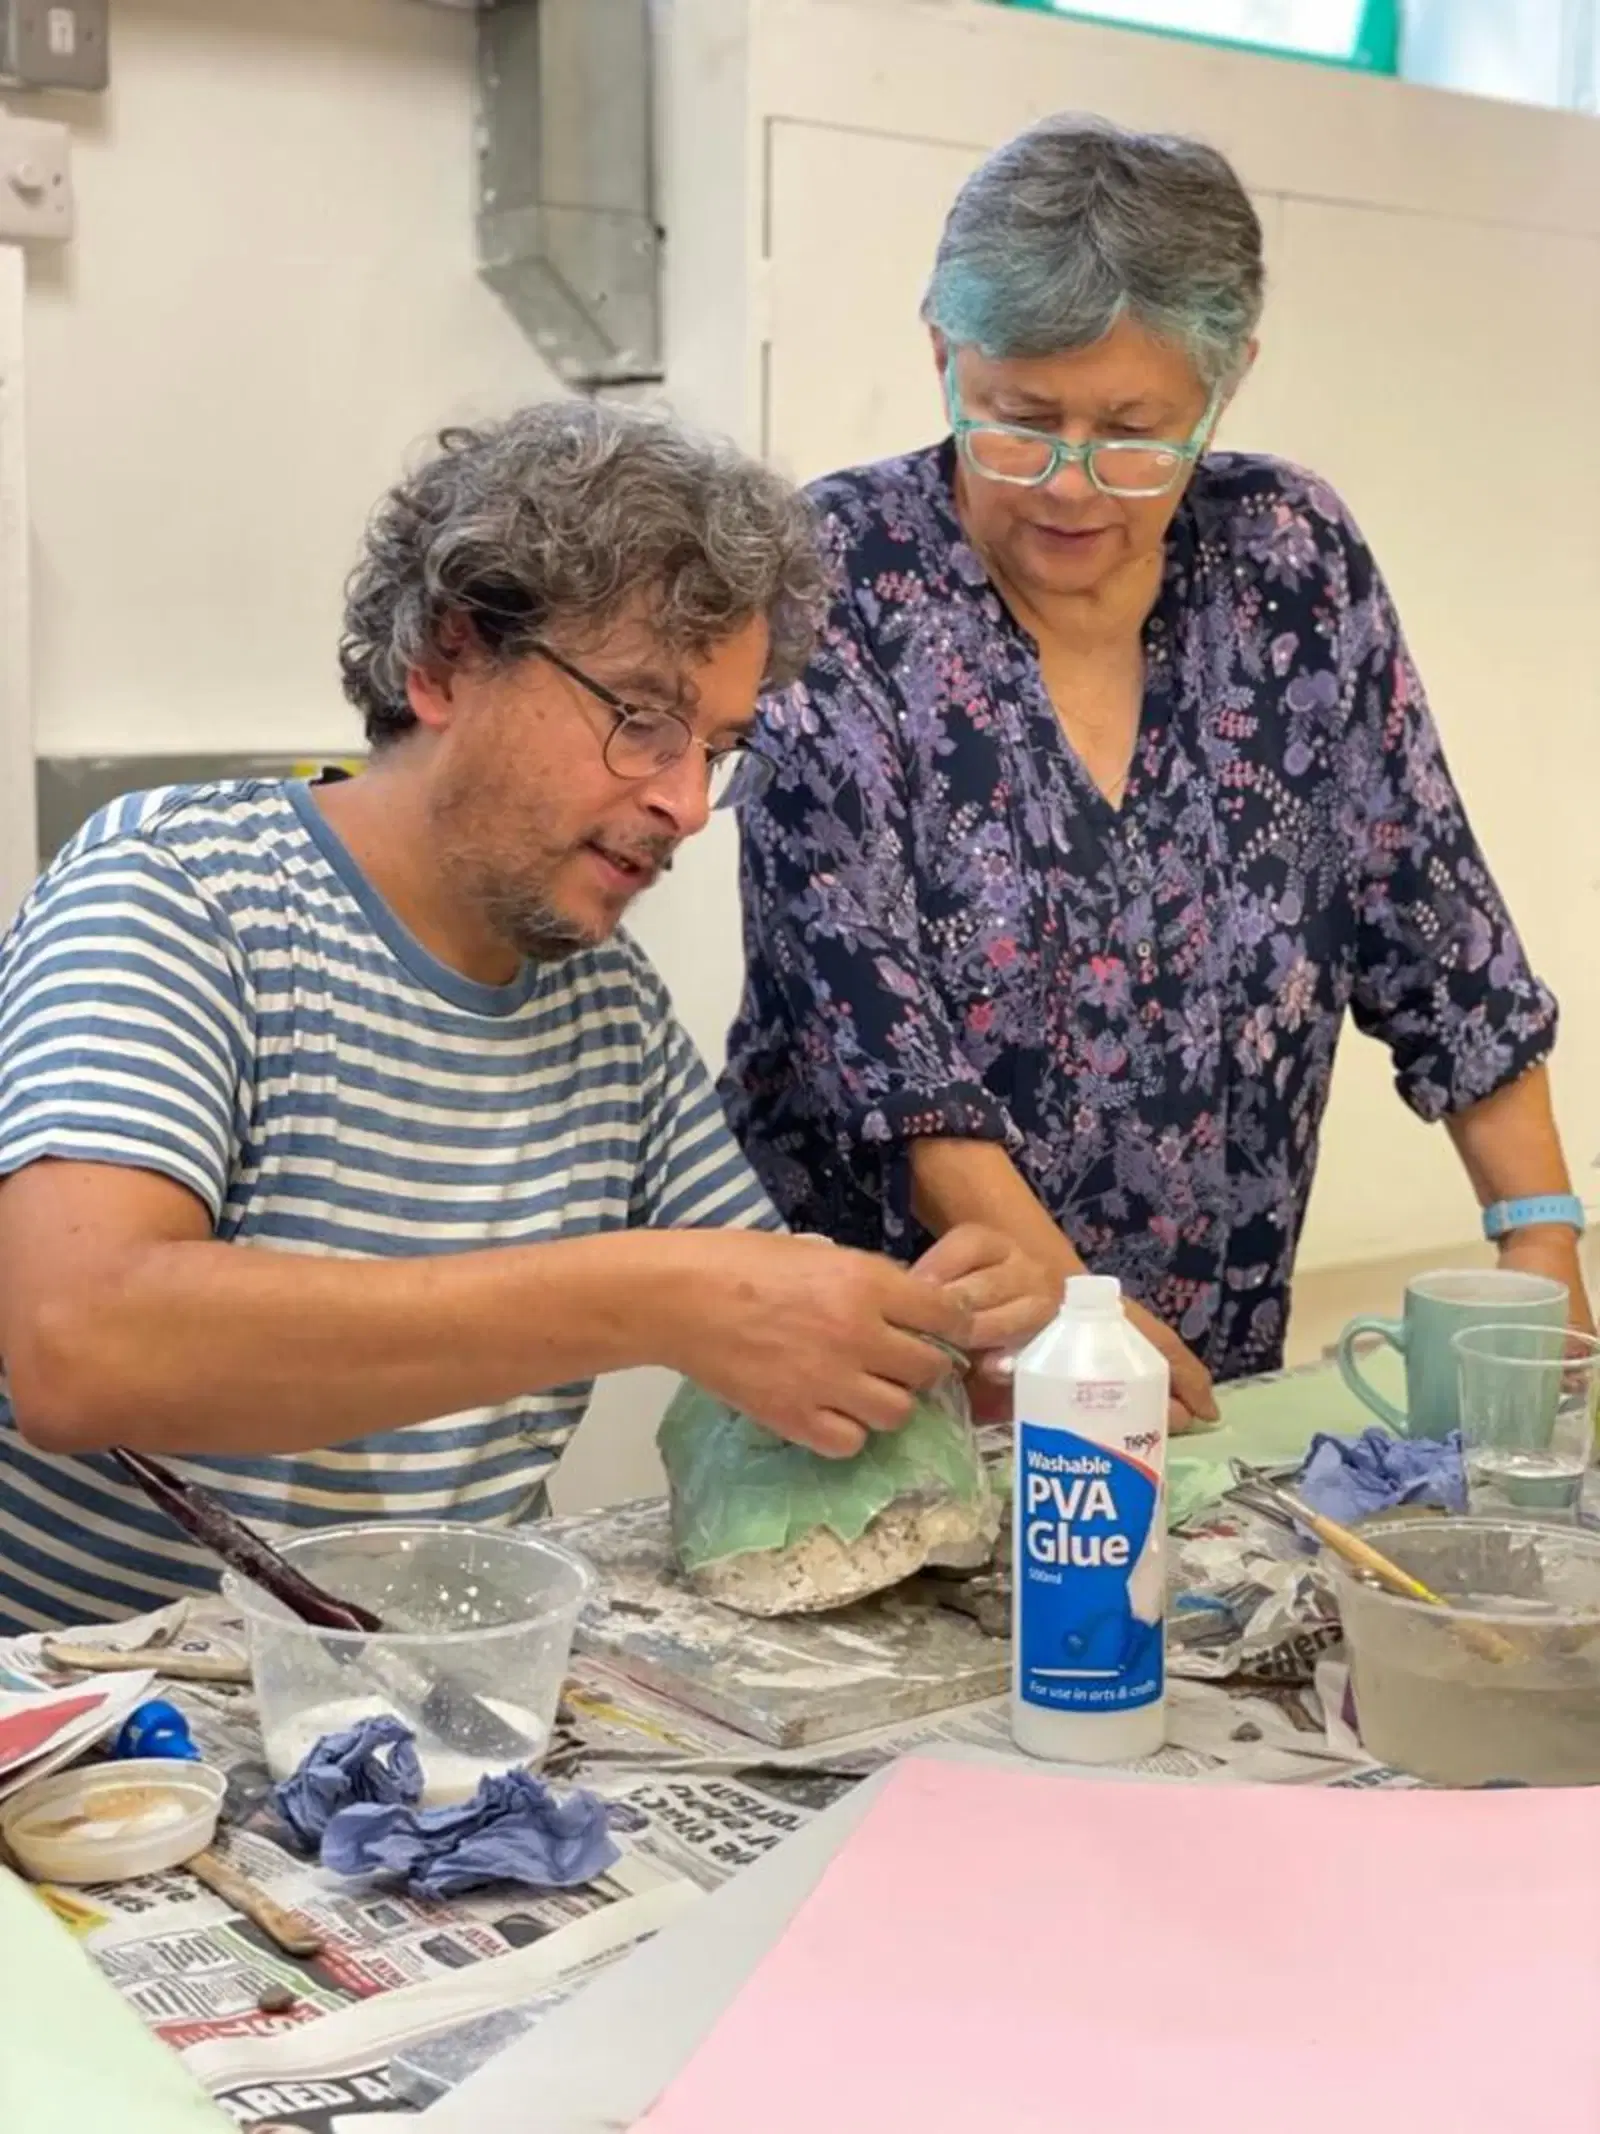 Creativity in action: a man and woman deeply focused while collaboratively working on a craft project involving paper mache and glue in an art workshop.